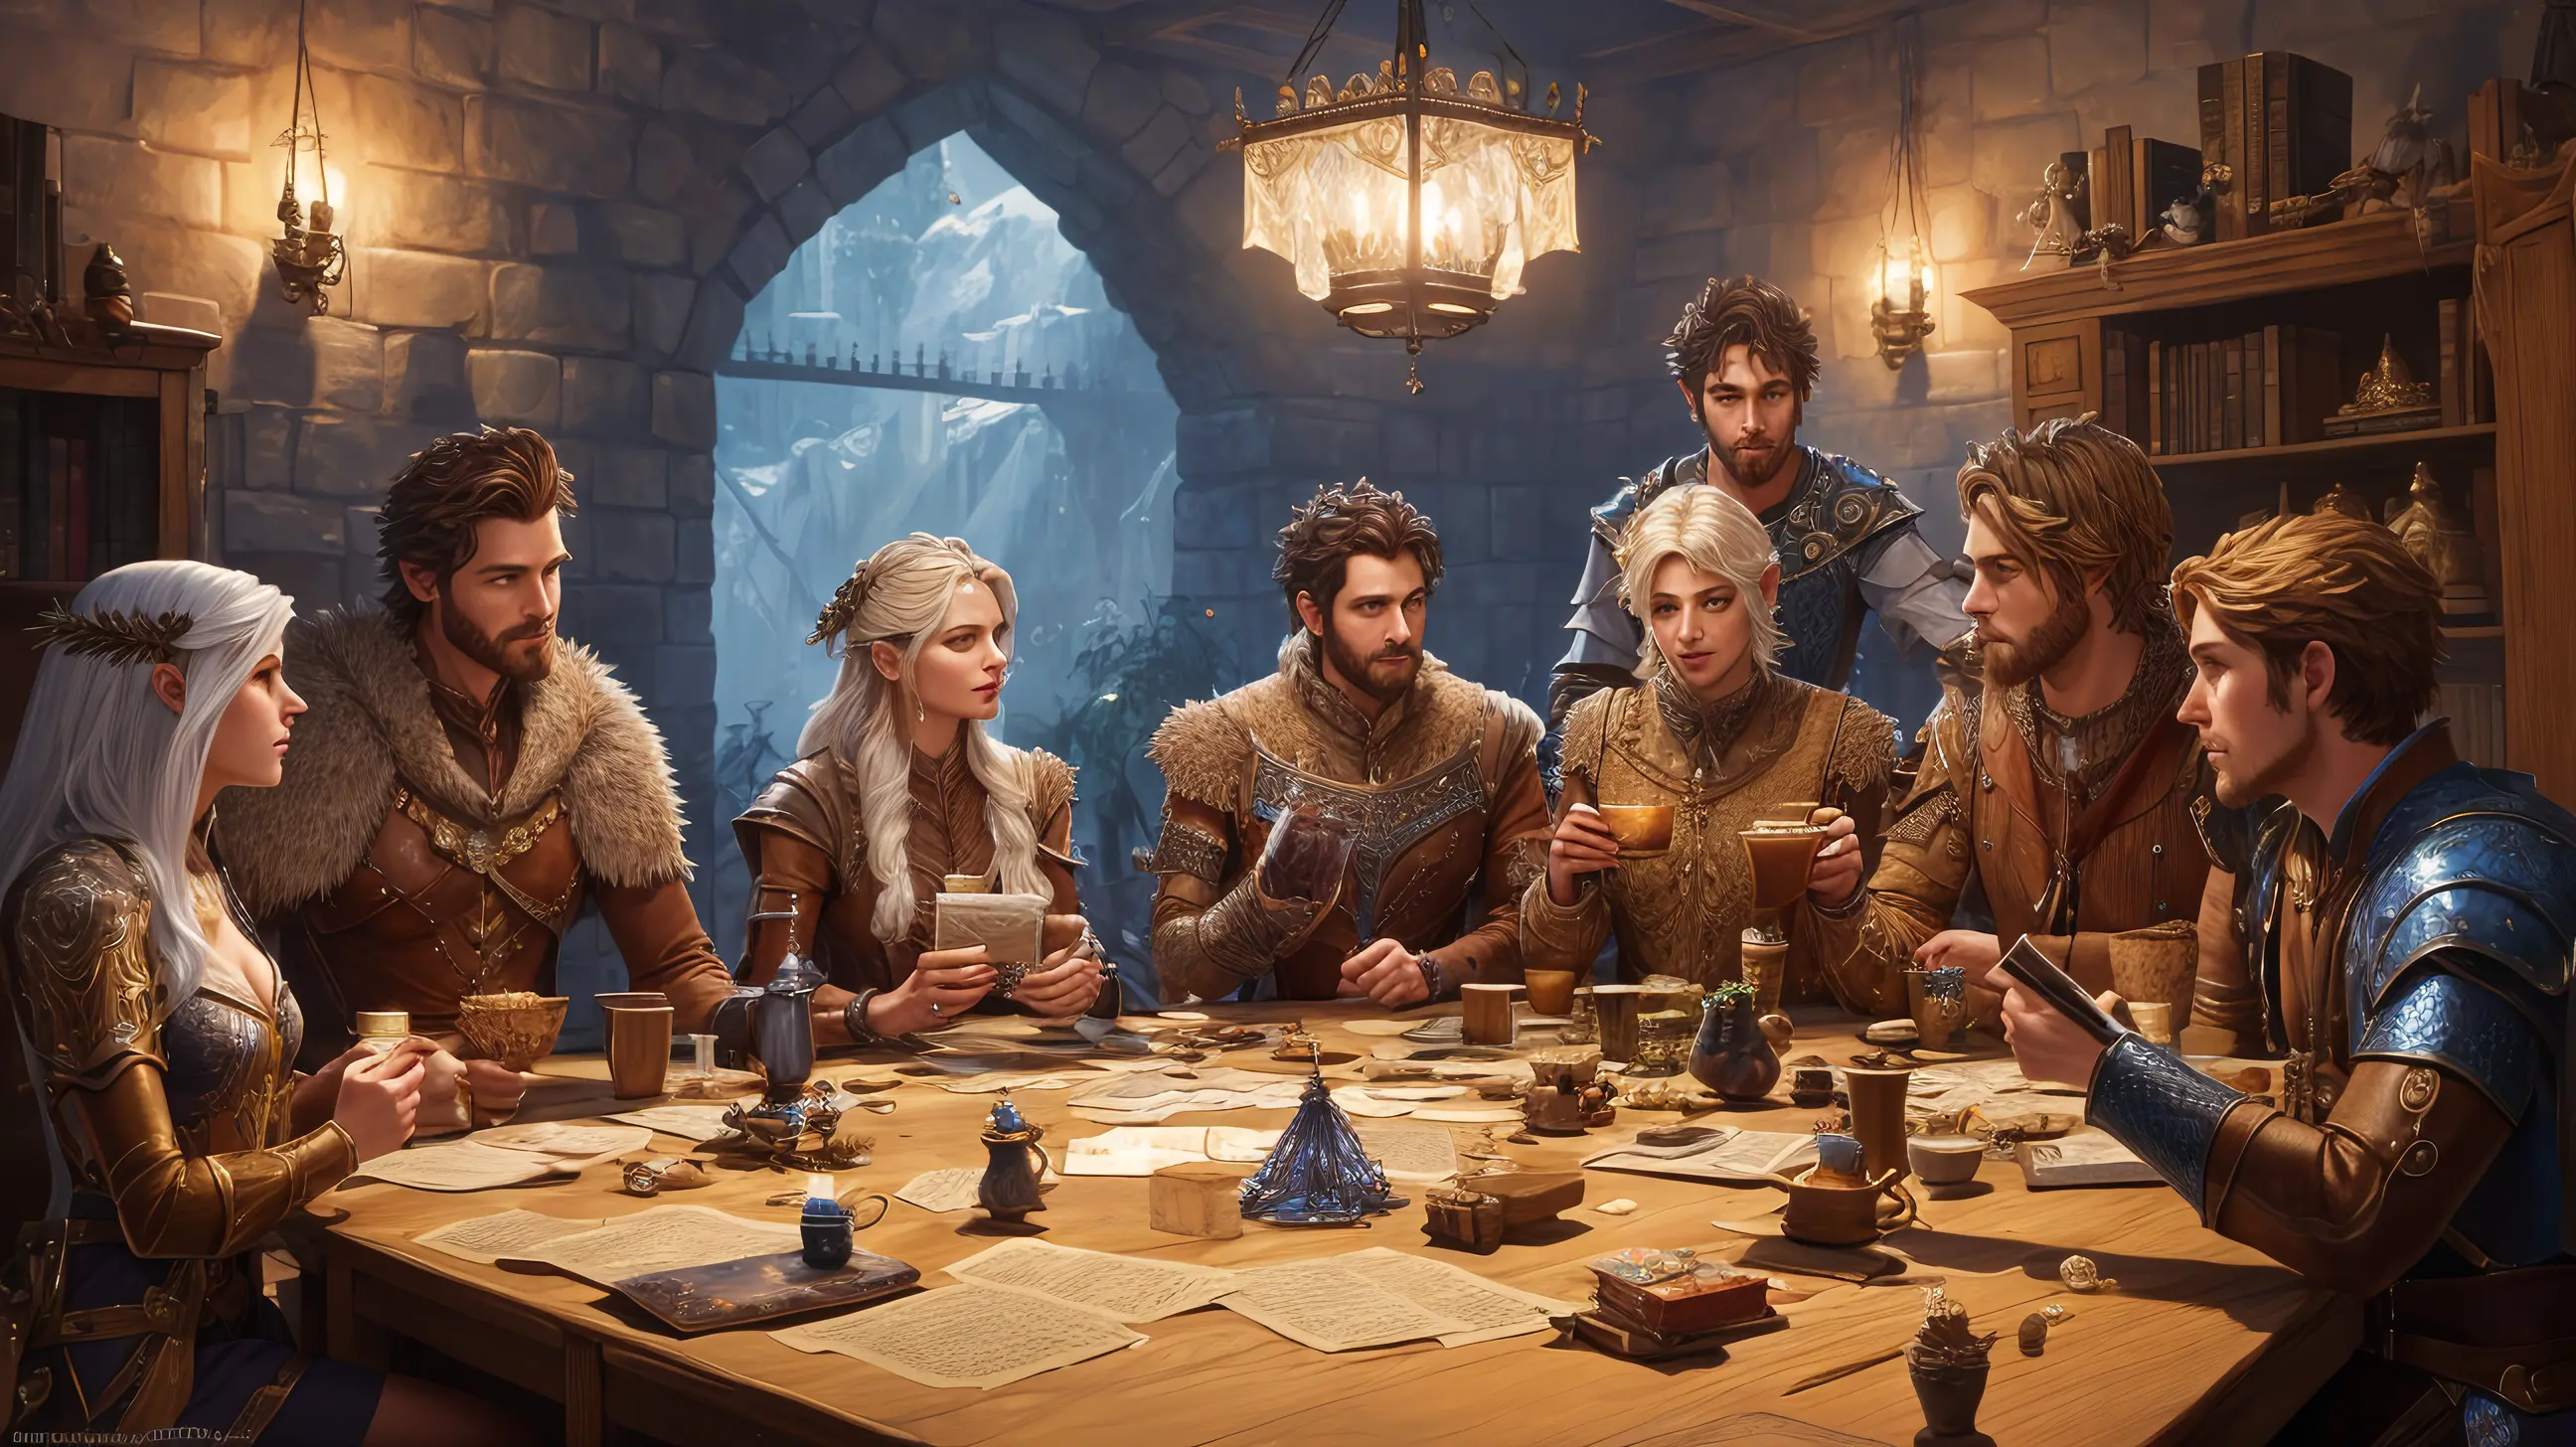 (concept art), (fantasy oil painting), subdued image that emphasizes the roleplaying aspect of the book, featuring a group of friends (male & female) (dressed in various styles of outfits) gathered around a table, engrossed in a TTRPG game. The scene could be rendered in a dreamlike, almost surreal style, with the players' imaginations coming to life in the form of fantastical creatures and landscapes. The cover could feature the players' characters in various poses, as well as the game master and any important NPCs. (on the table: dice, miniature castle, books, cups), good composition, good design, good architecture, good proportions, good anatomy, volumetric lighting, intricate, detailed, award winning, masterpiece,